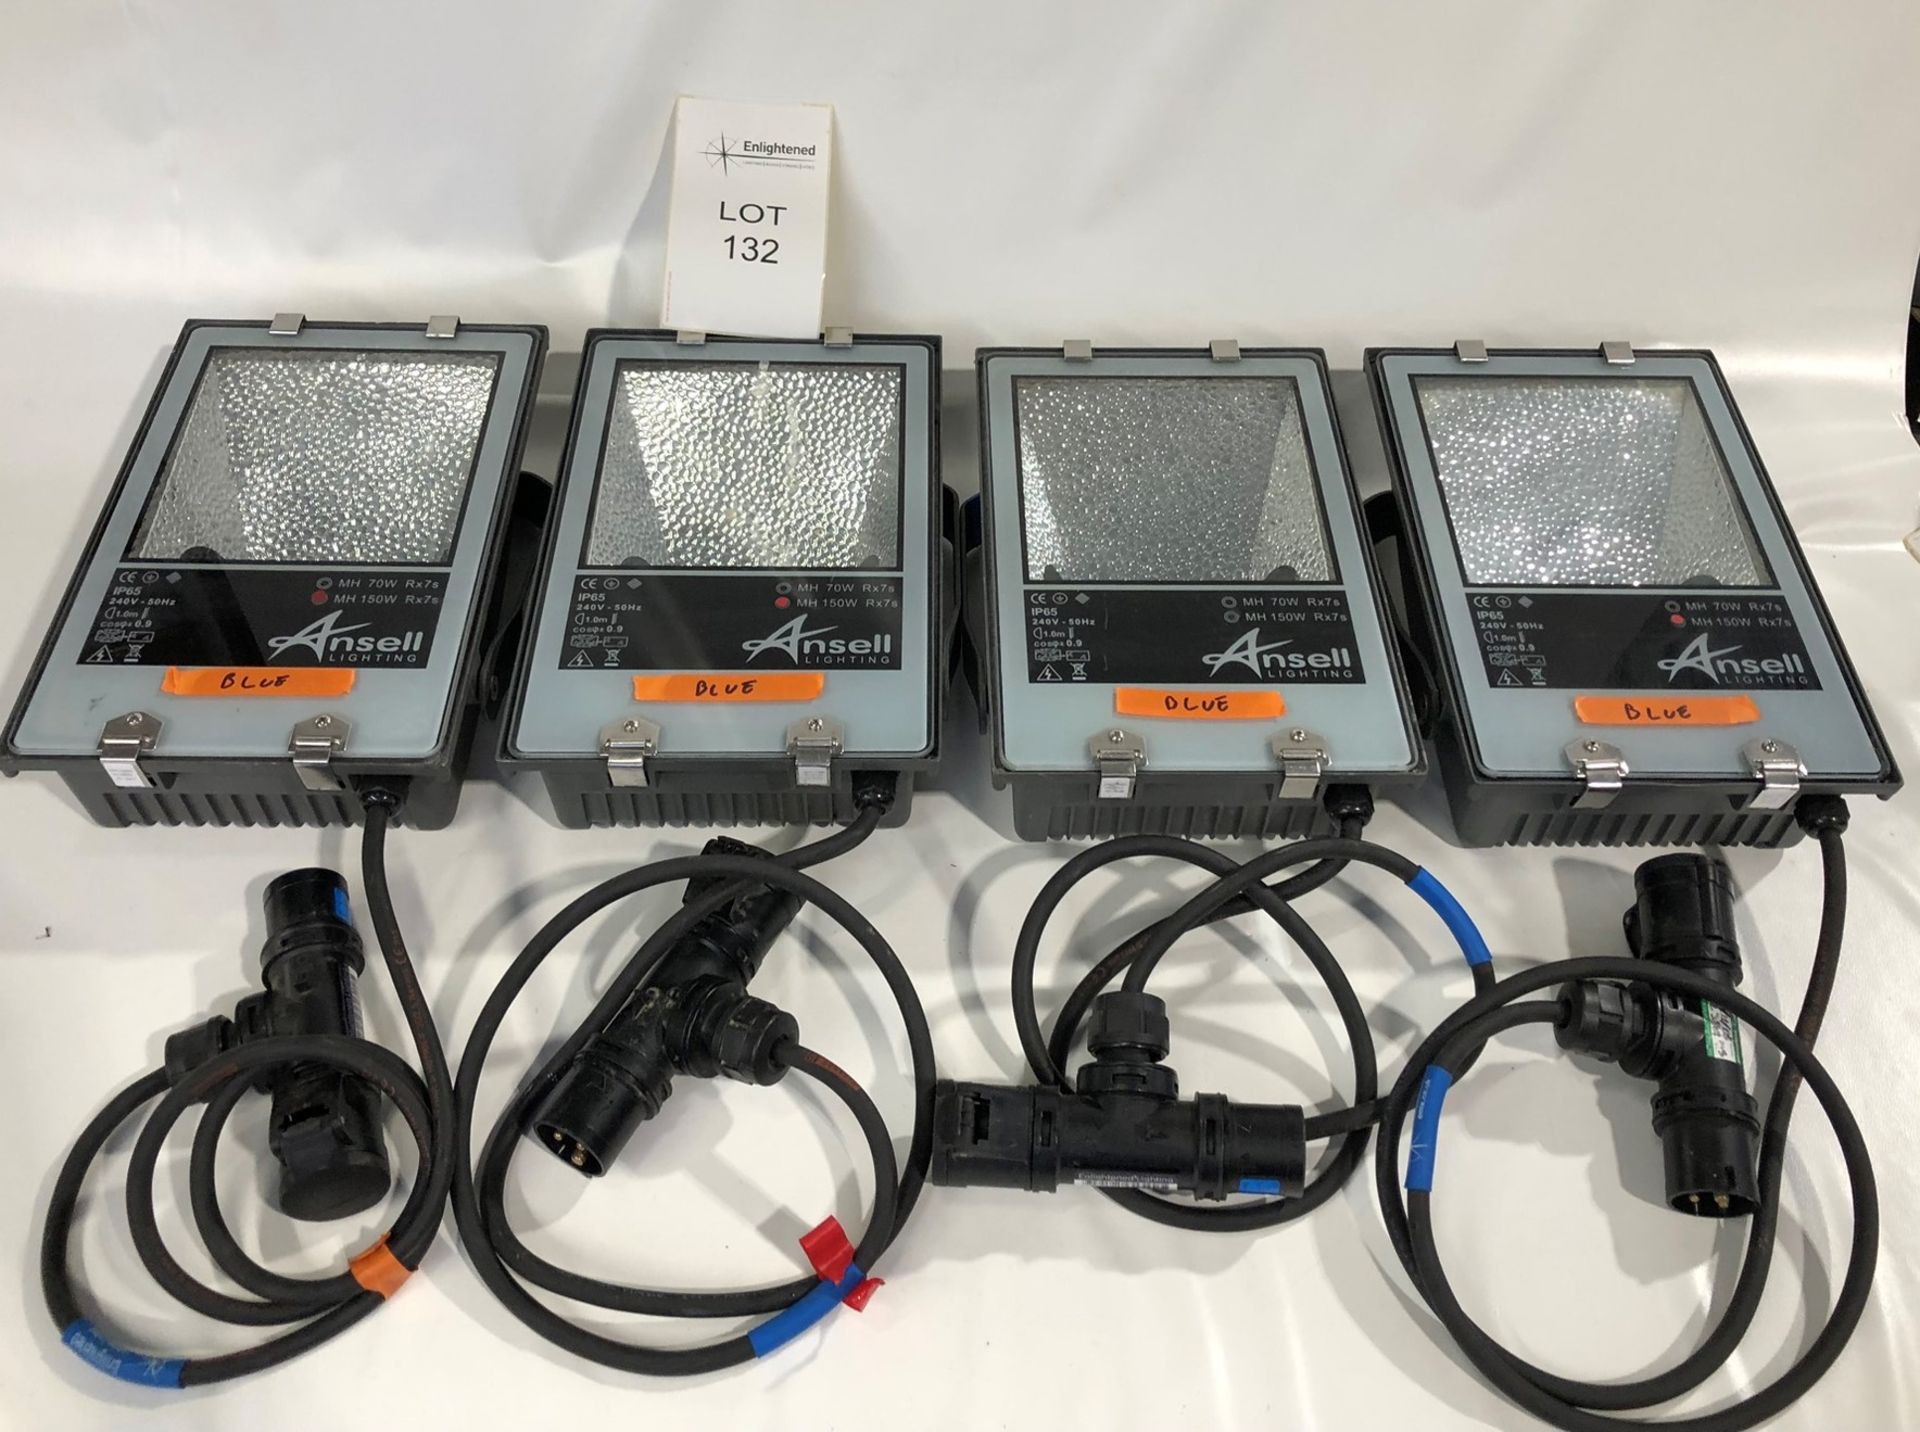 4x 150W MBI Discharge Power Floods with Blue lamps Condition: Ex-Hire Set of 4x 150w Power Floods